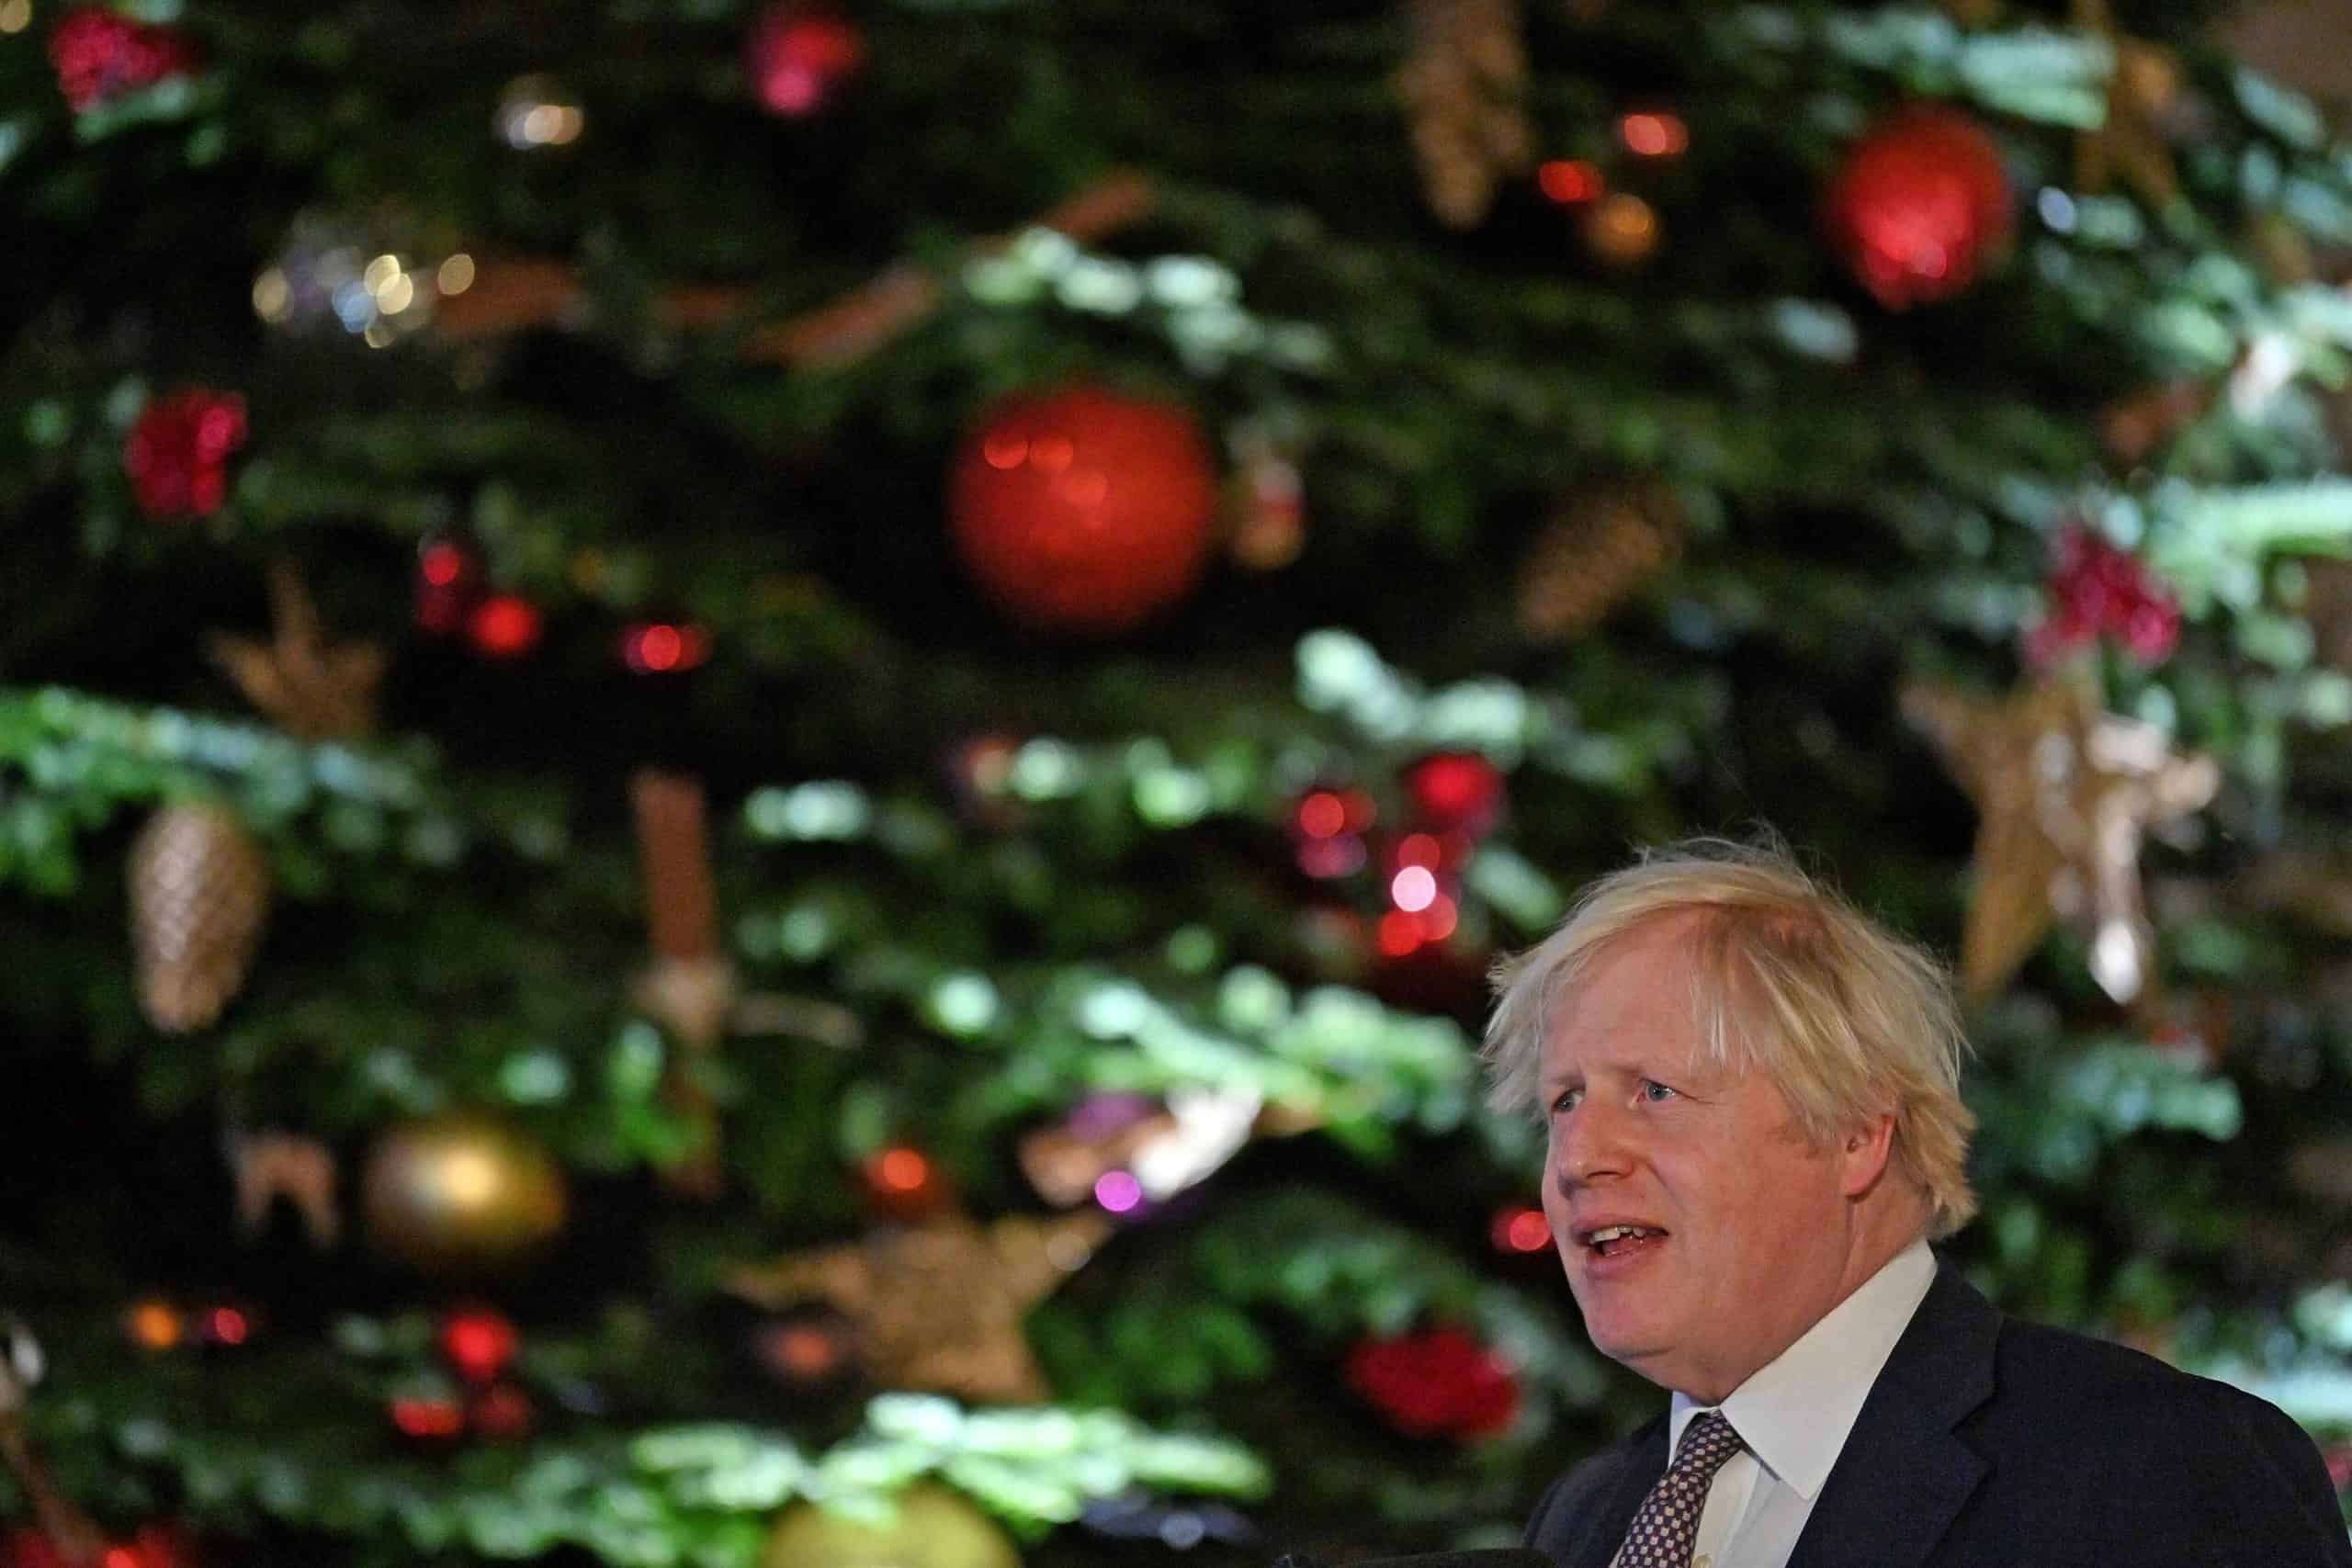 Watch: Clip goes viral for nailing the Johnson Xmas party allegations